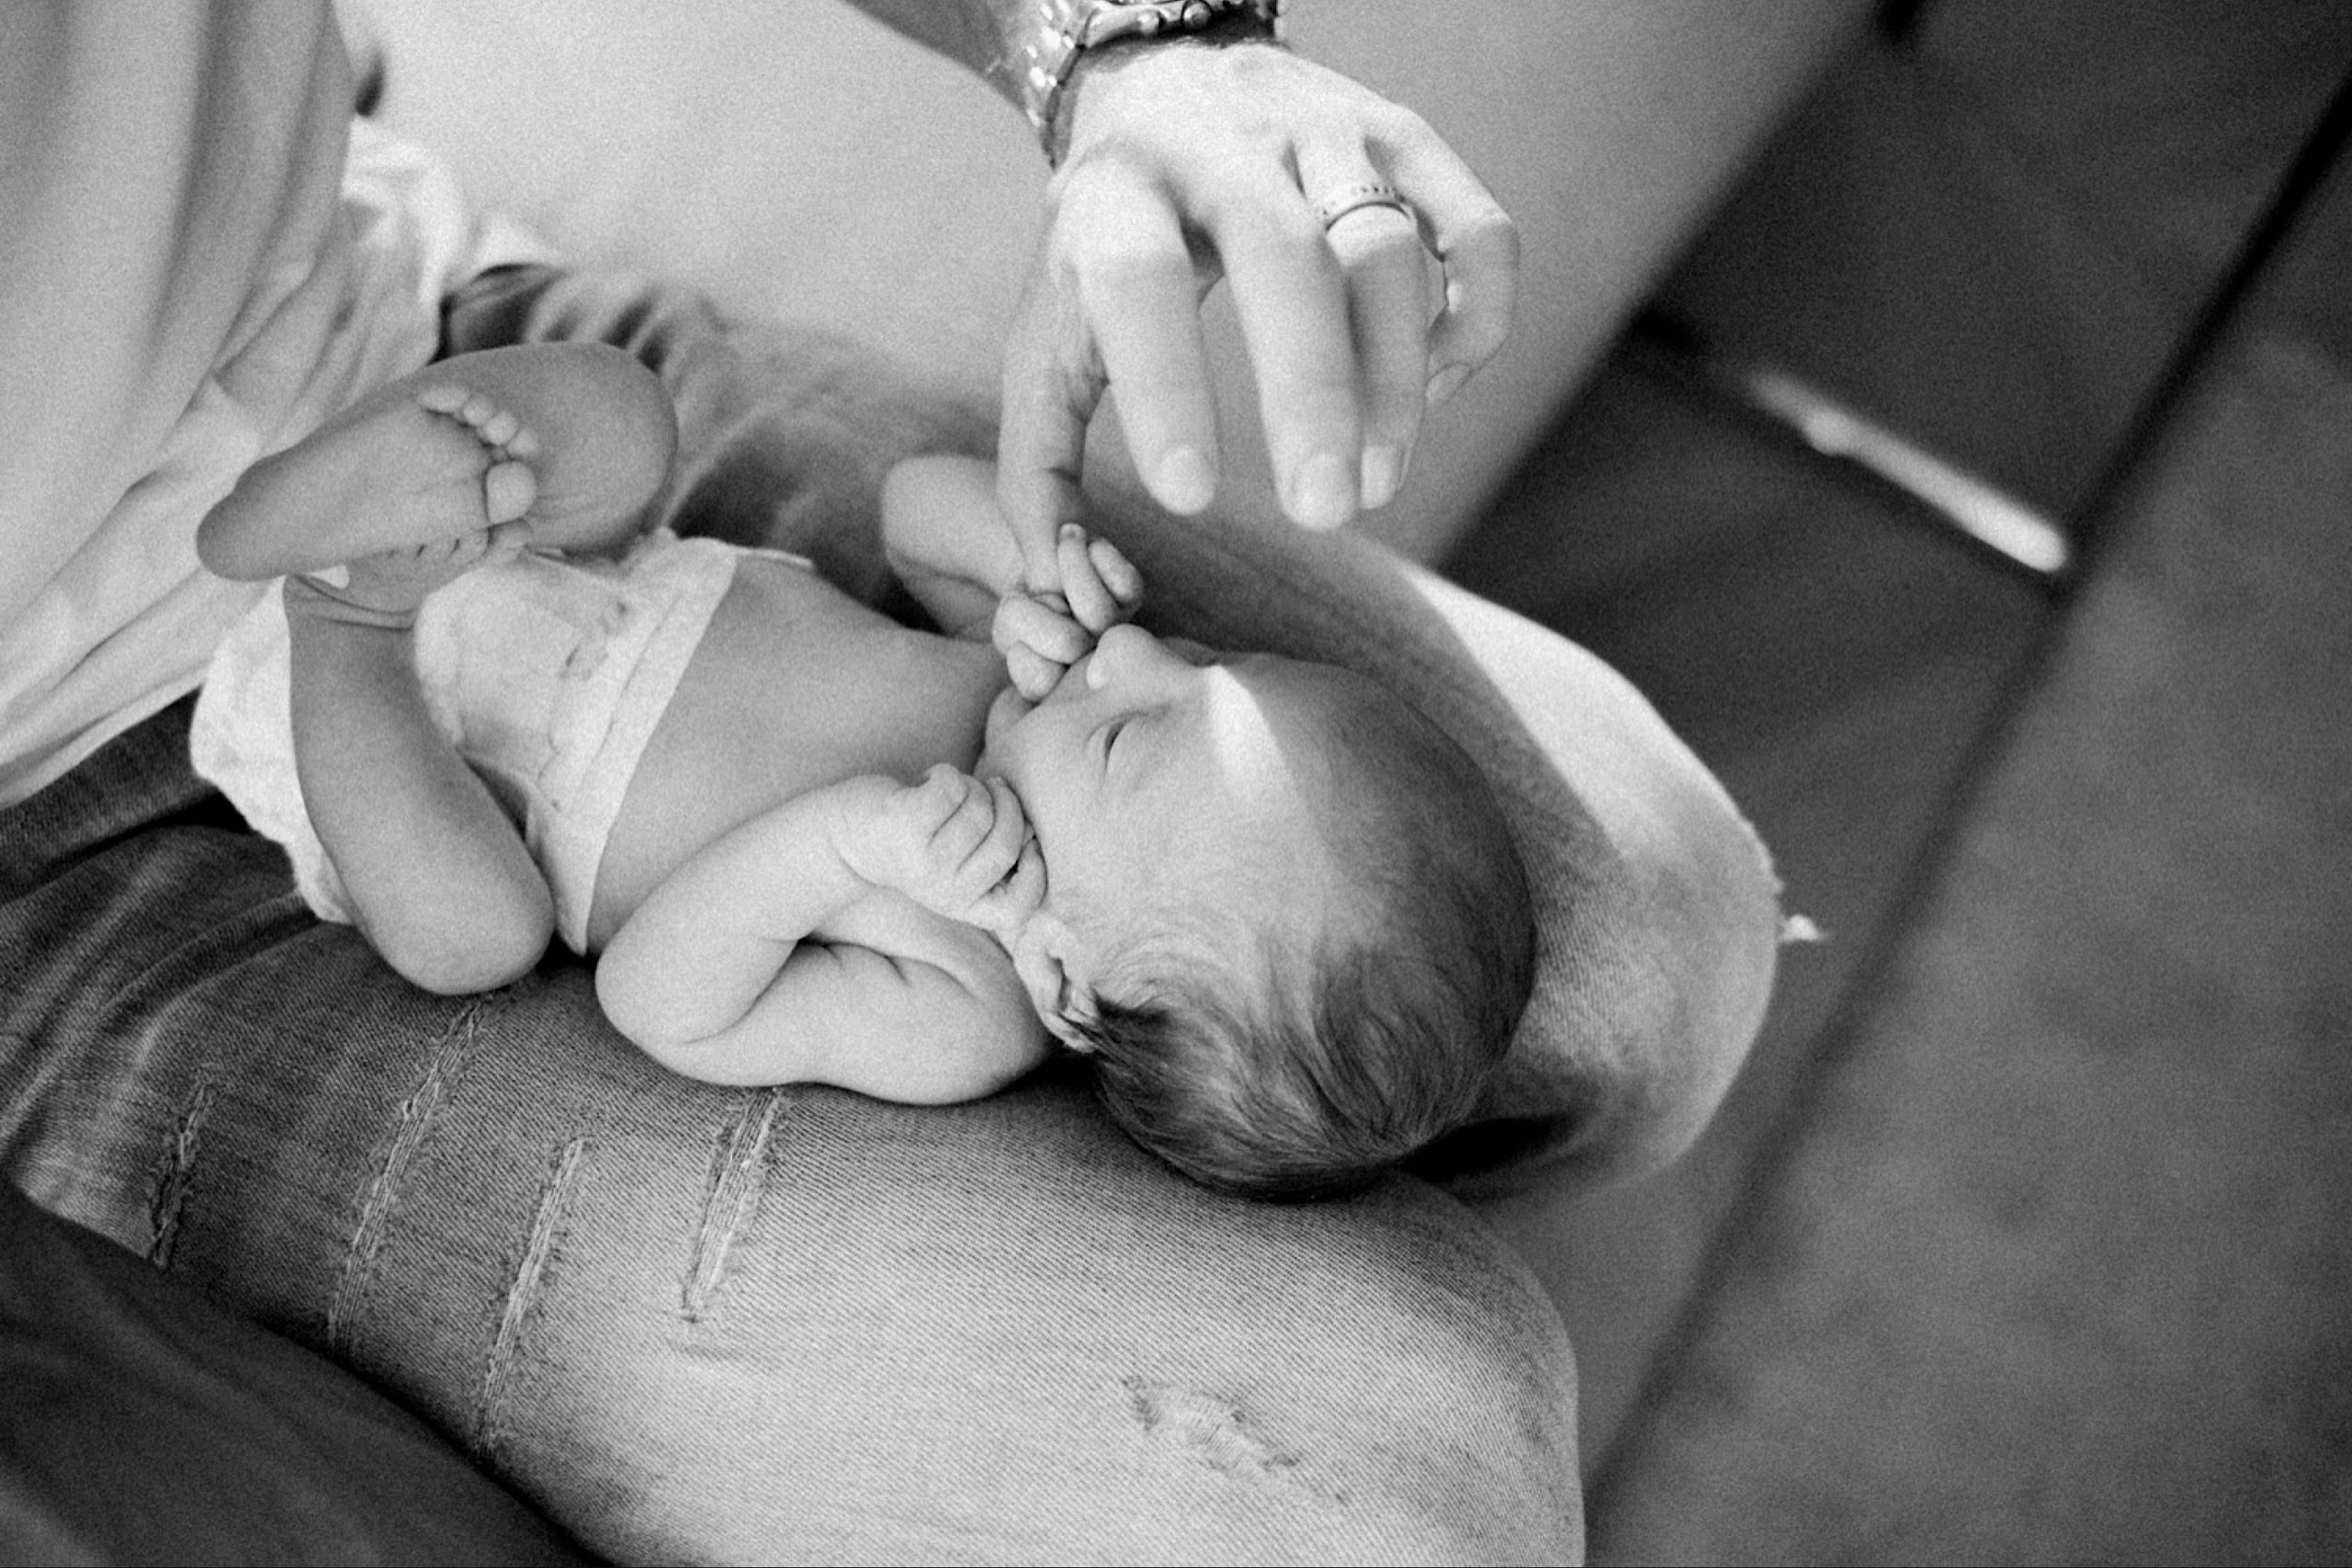 Black & white, Italy Newborn Photography of a newborn baby lying on her Dad's lap, holding his thumb in her hand.